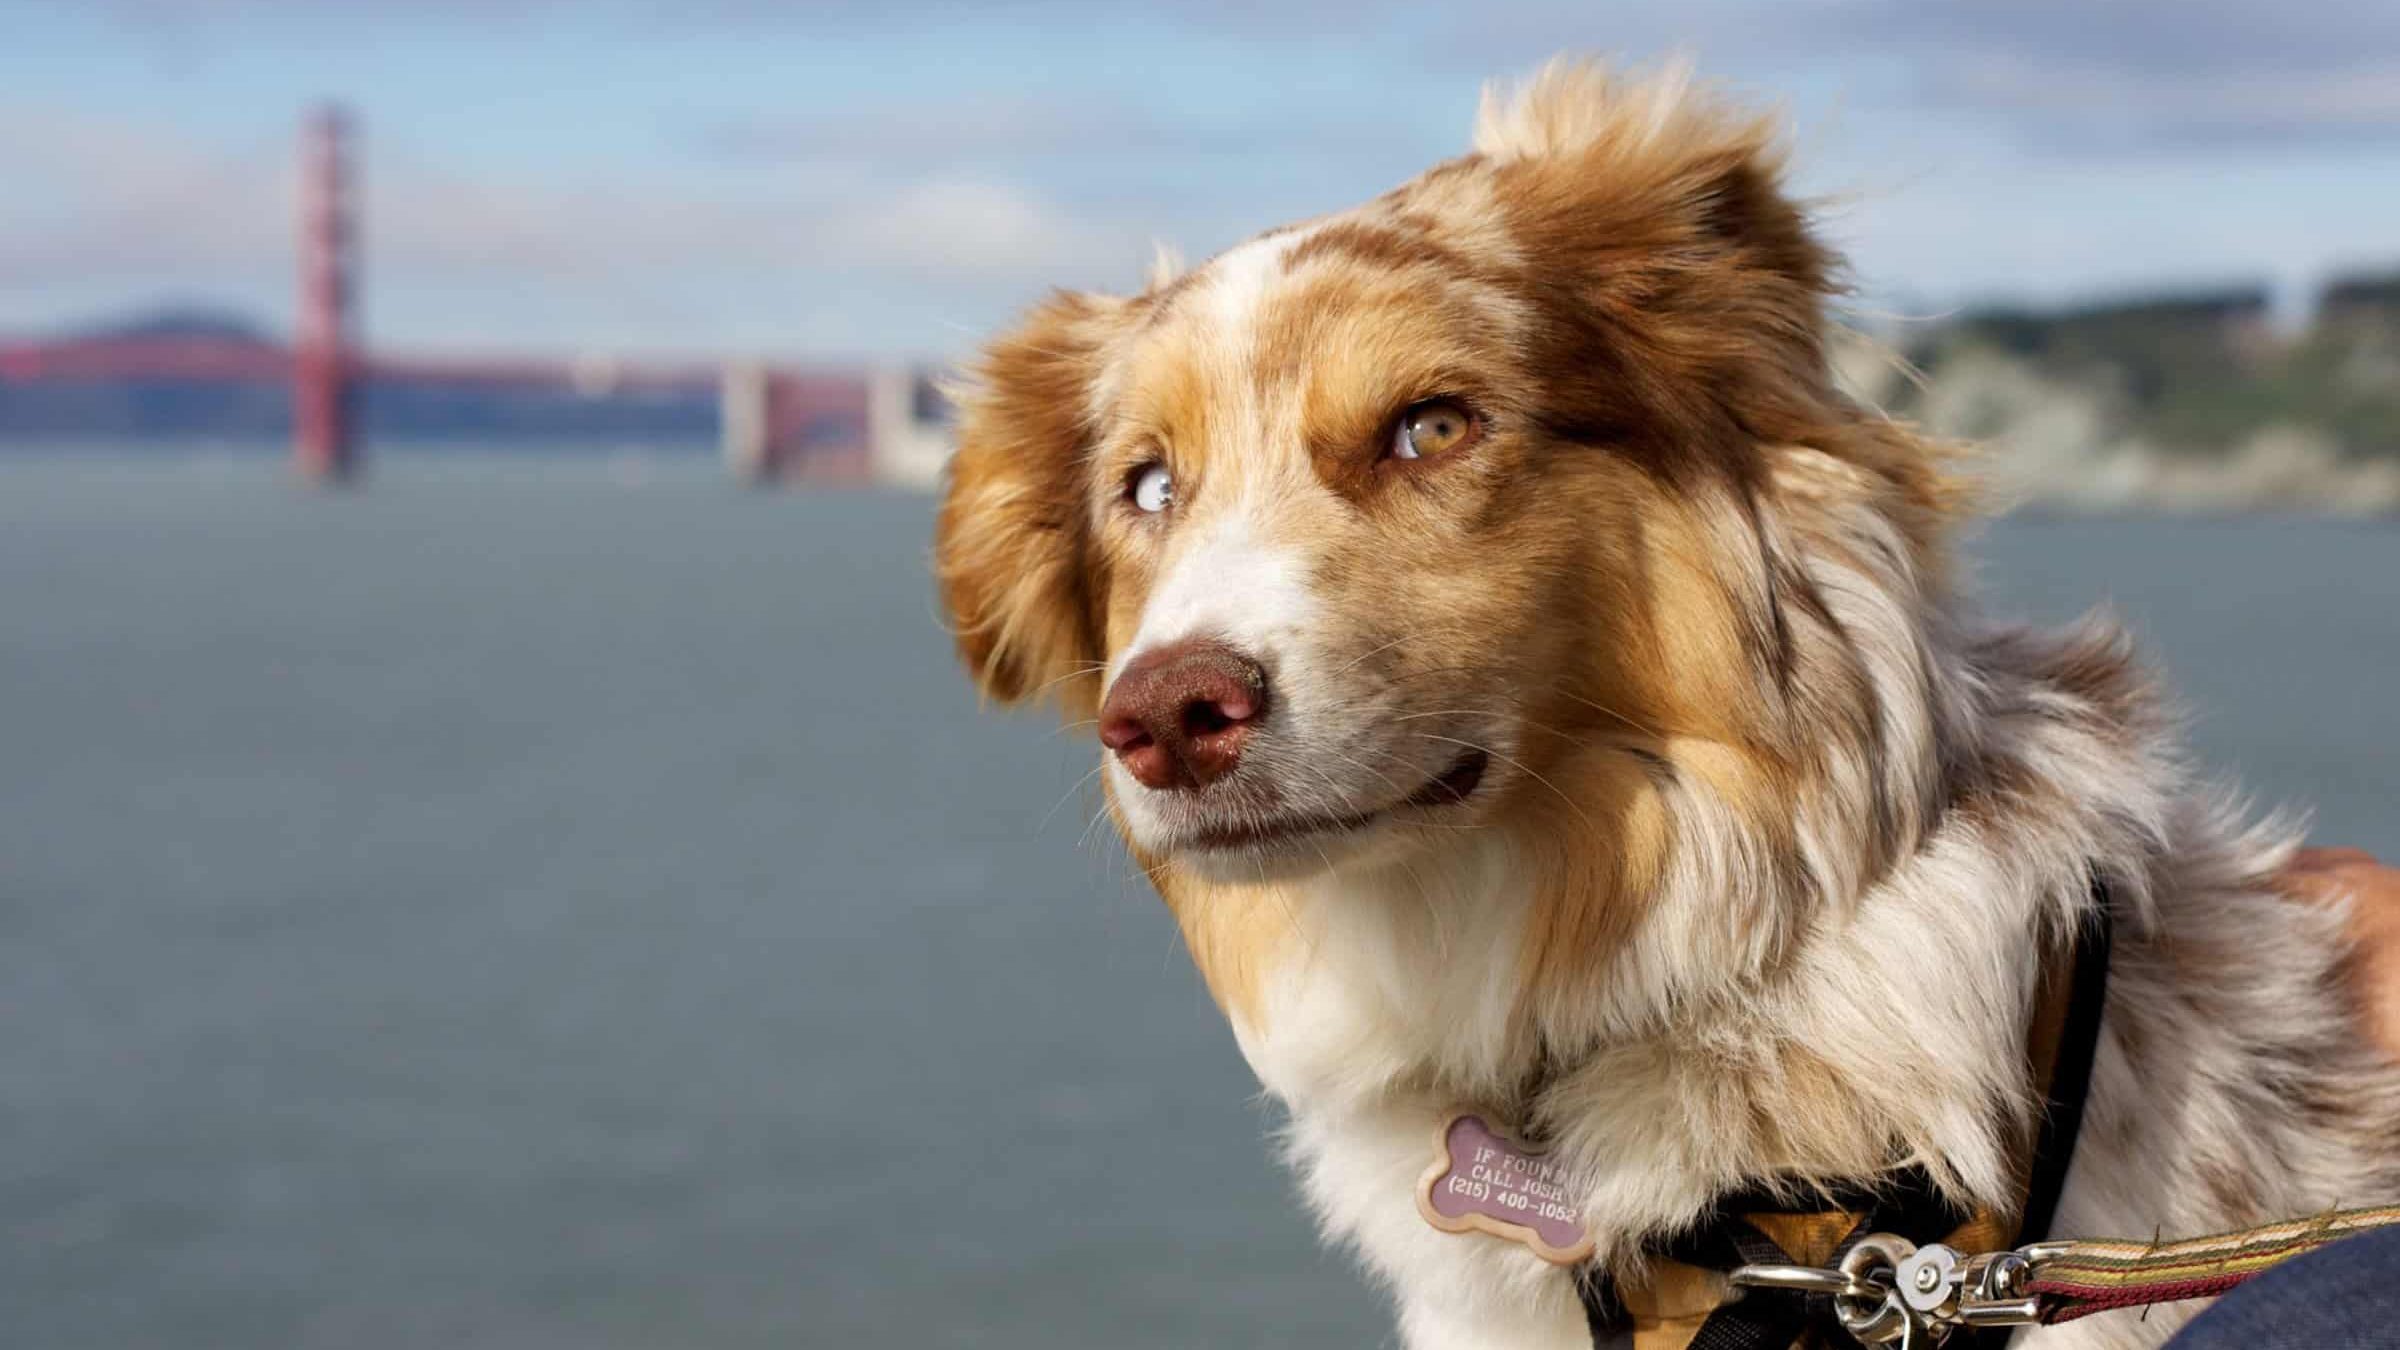 Capture a breathtaking moment with your Australian Shepherd dog against the spectacular backdrop of the iconic Golden Gate Bridge. This unforgettable experience will not only provide endless joy for your furry friend but also yield perfect photo opportunities that you'll cherish forever. - Dogtrekker